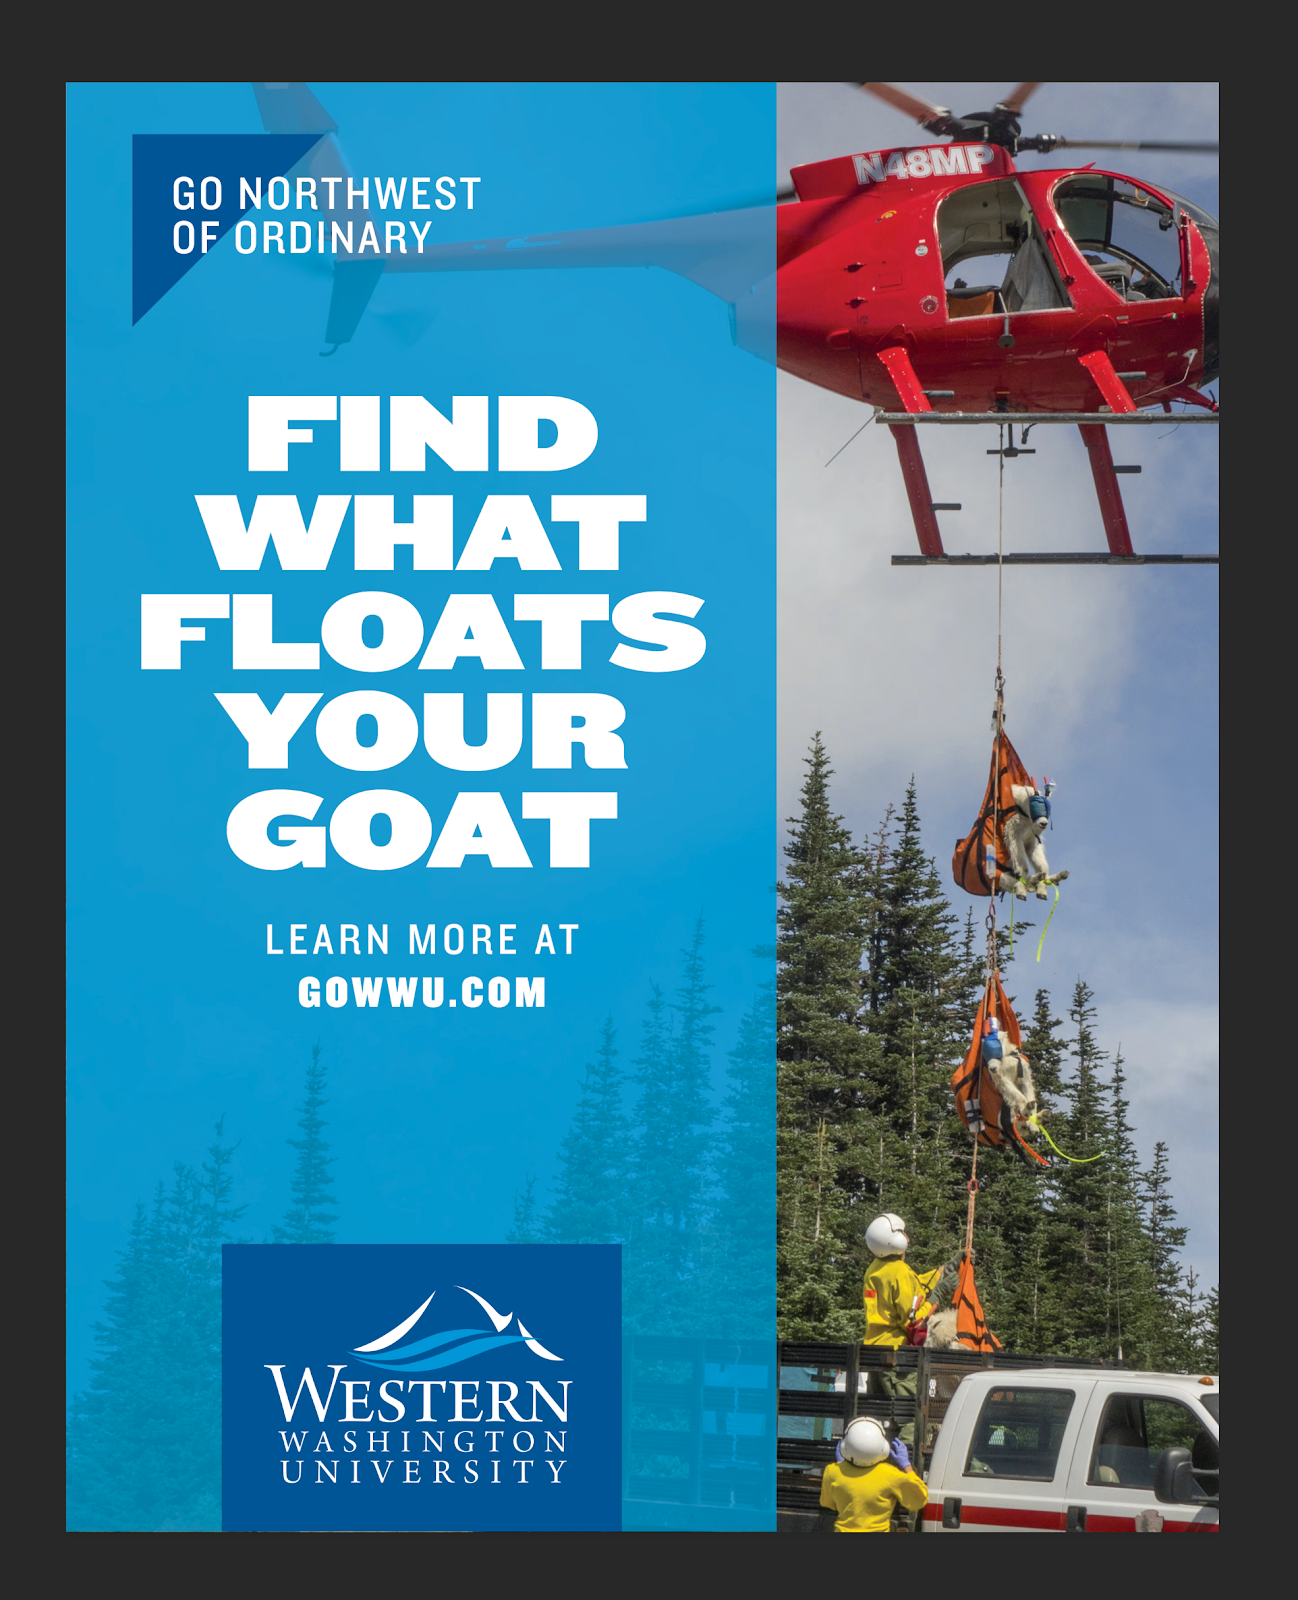 Western ad featuring goast being airlifted by helicopter with text "Find What Floats Your Goat"